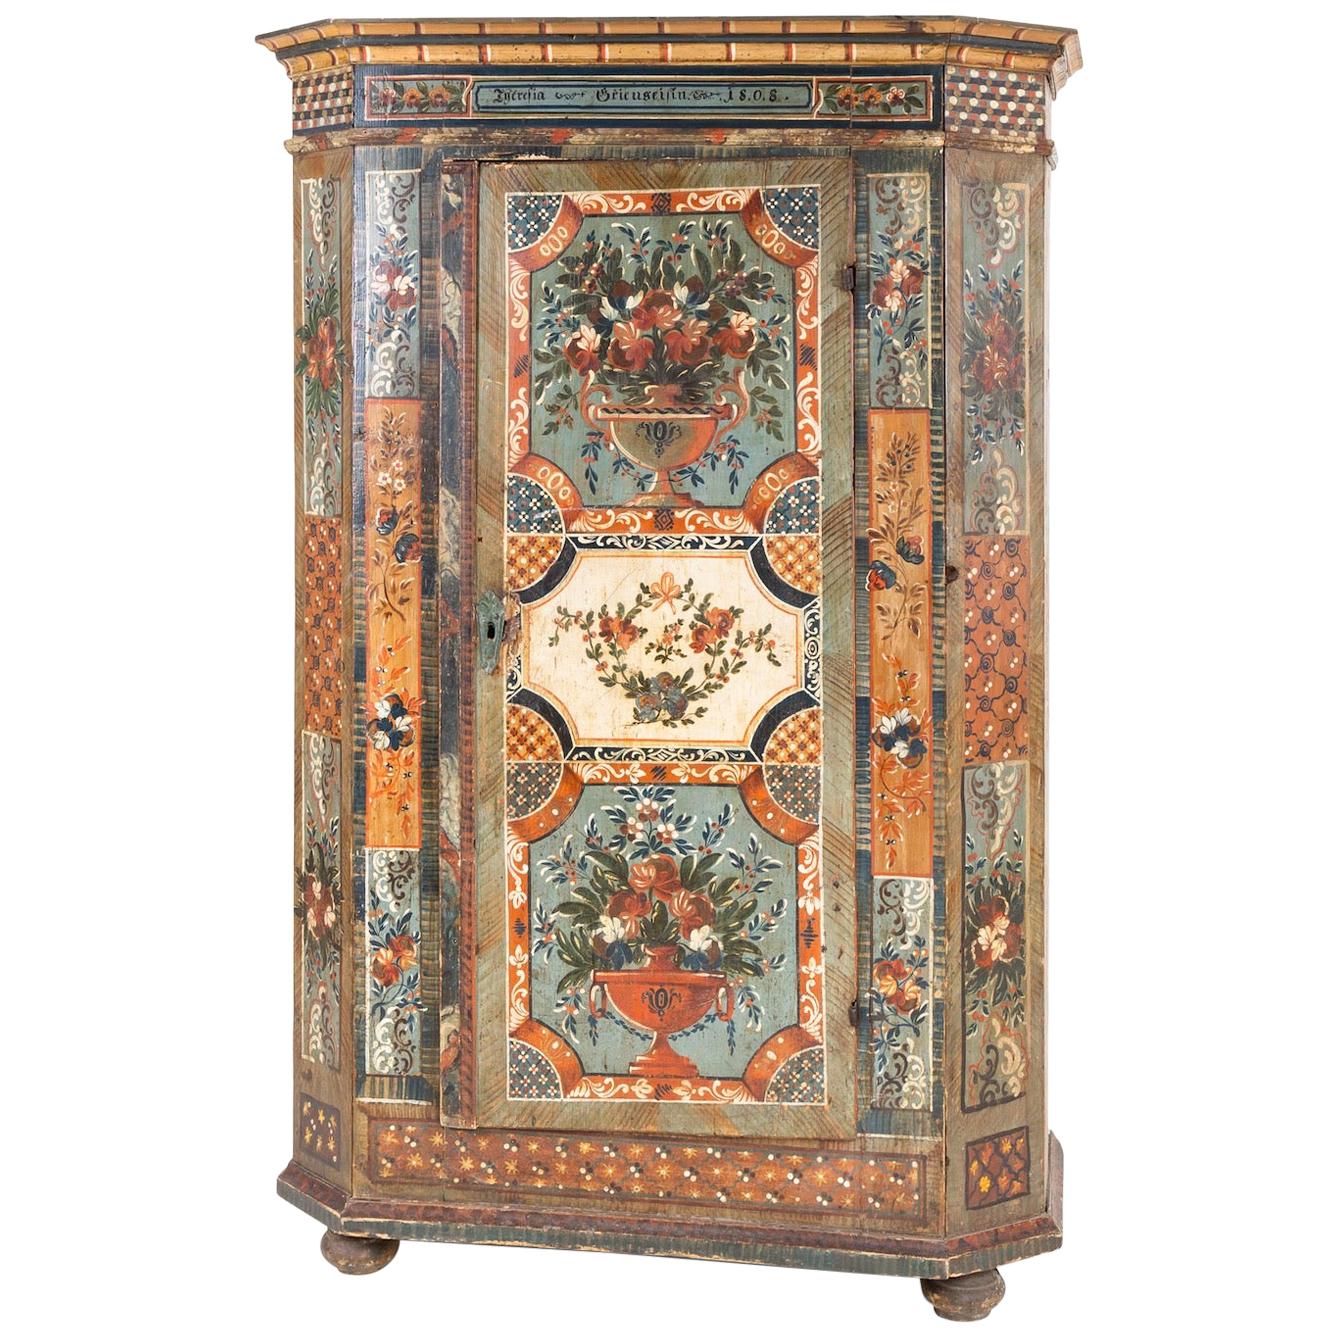 Painted Provincial Cupboard, Southern Germany, Dated 1808